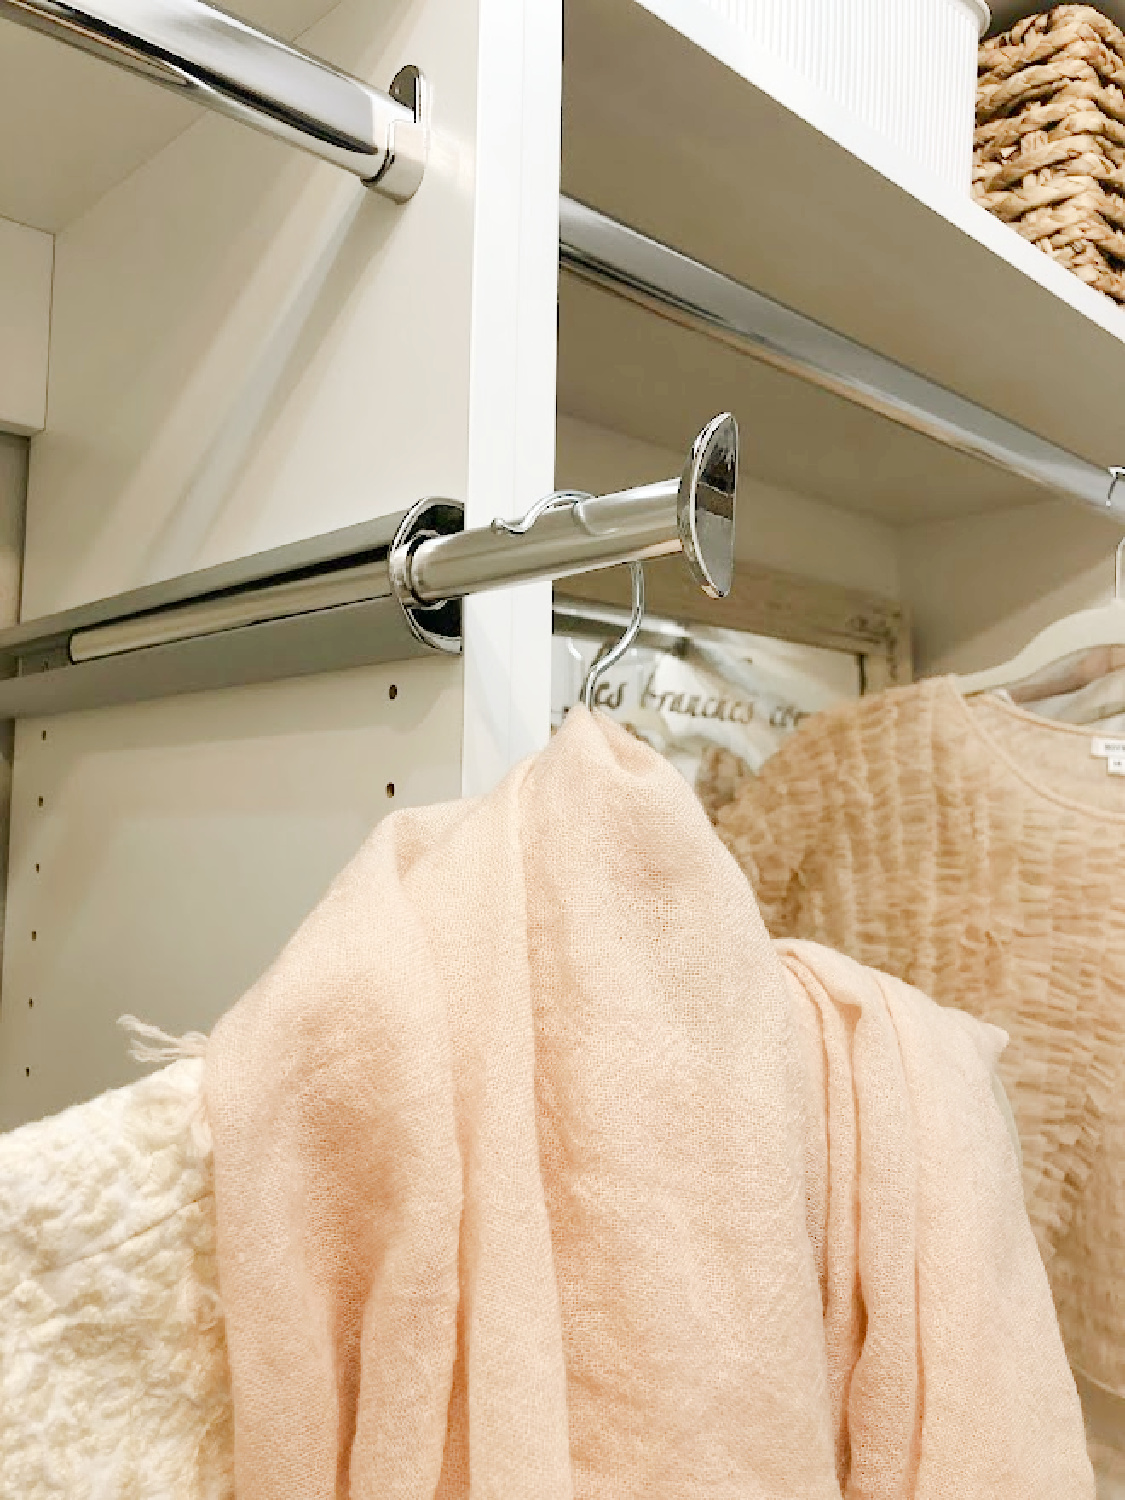 This closet valet extendable hook in our DIY custom closet makes getting dressed so much more fun and feels shop-like at home! From Modular Closets - come see Hello Lovely's DIY closet. #closetaccessories #closetfeatures #valethooks